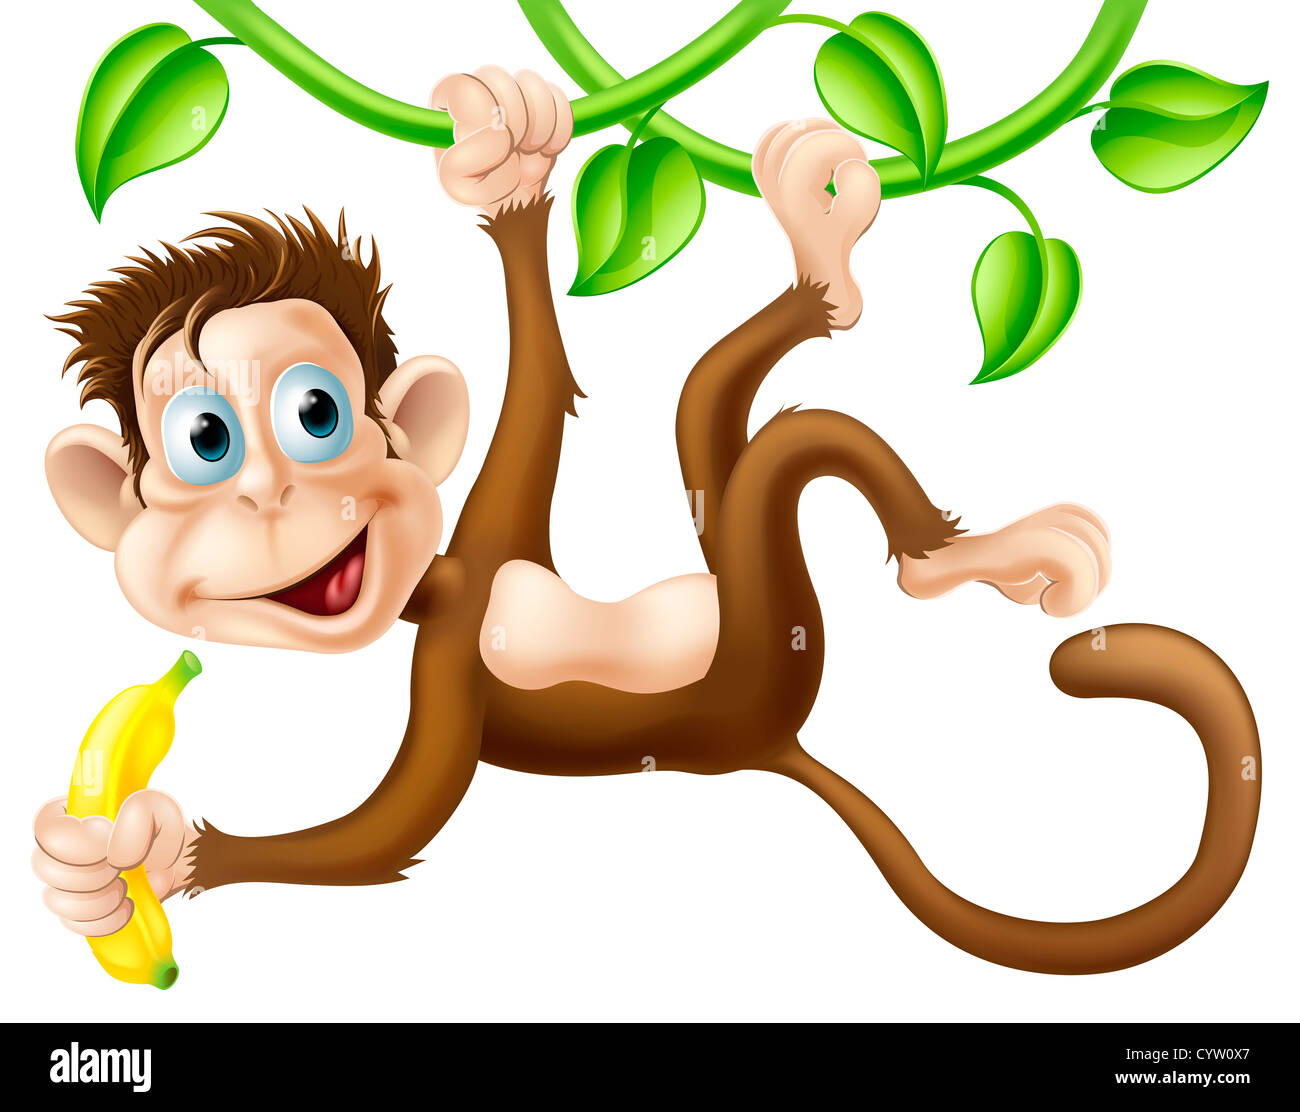 A cute monkey swinging from vines with a banana in his hand Stock Photo